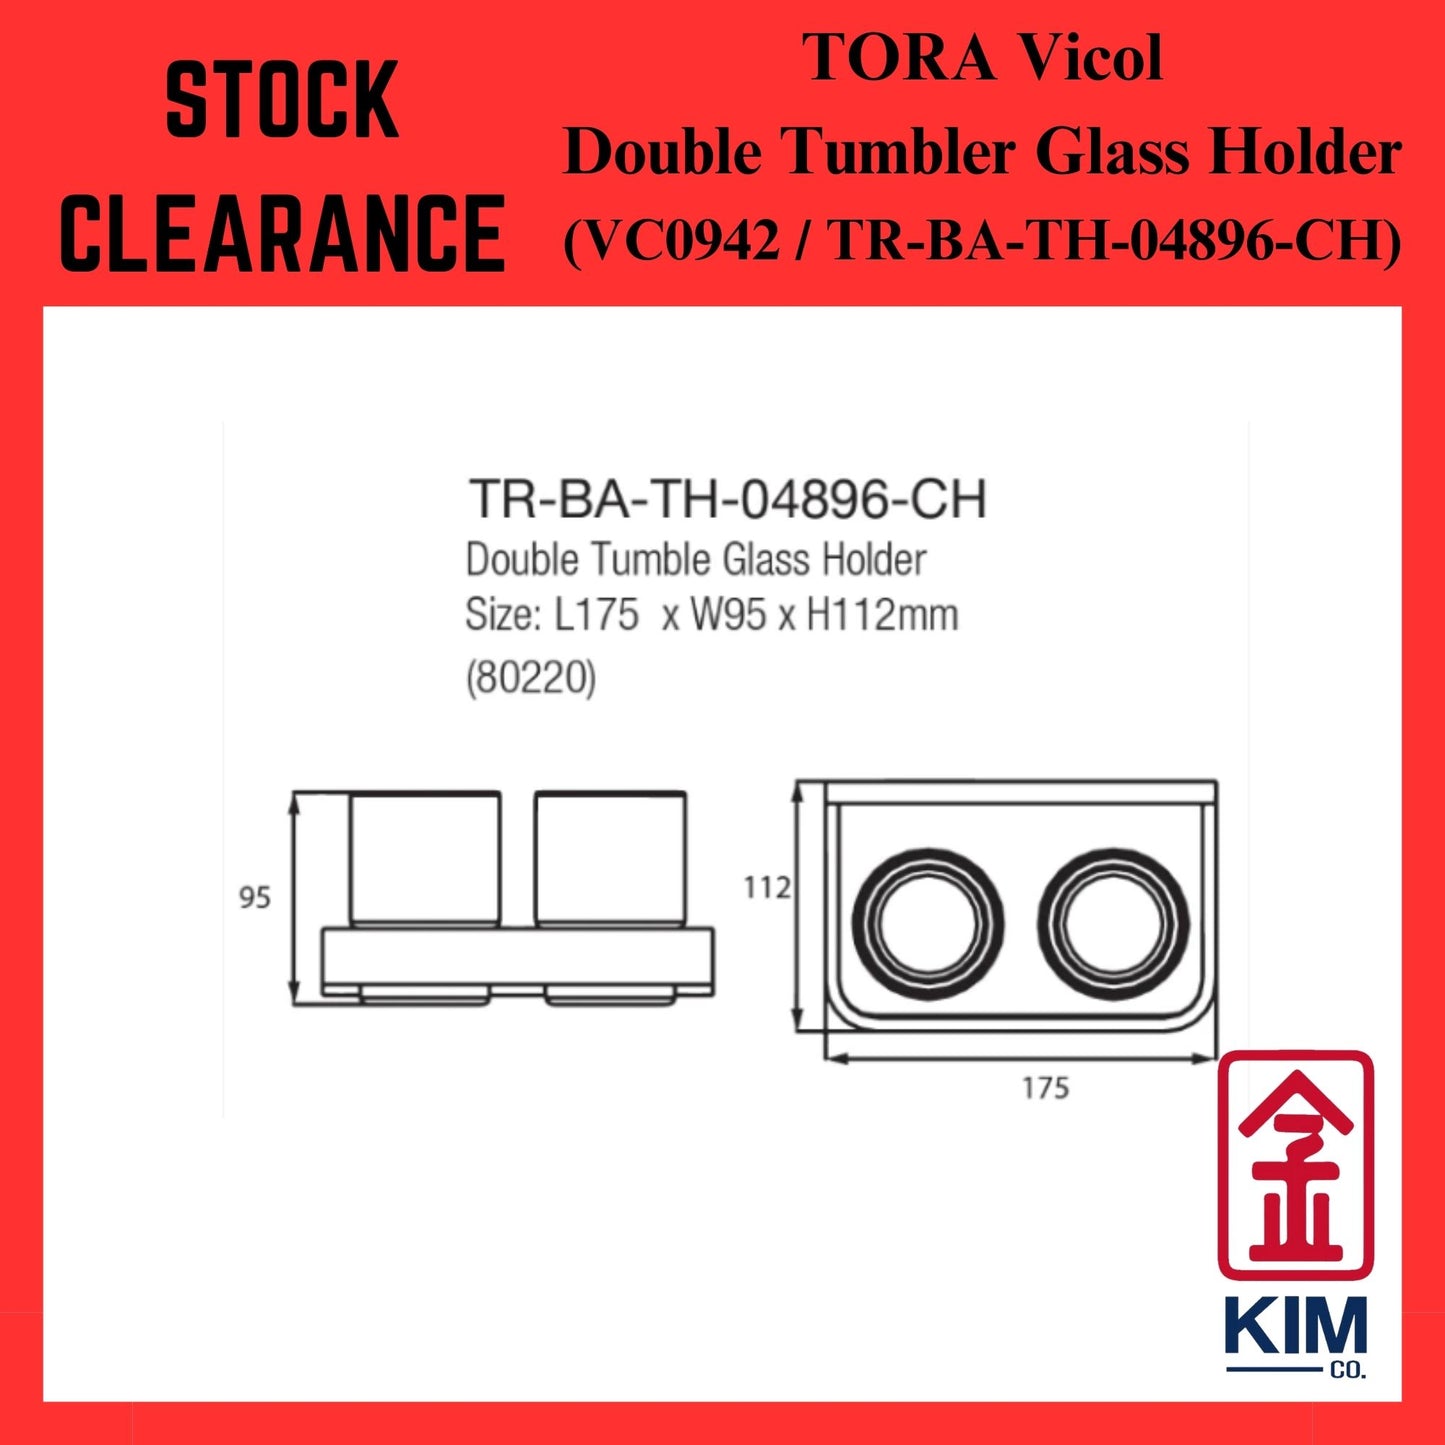 (Stock Clearance) Tora Vicol Brass Chrome Double Tumbler Glass Holder (VC0942 / TR-BA-TH-04896-CH)